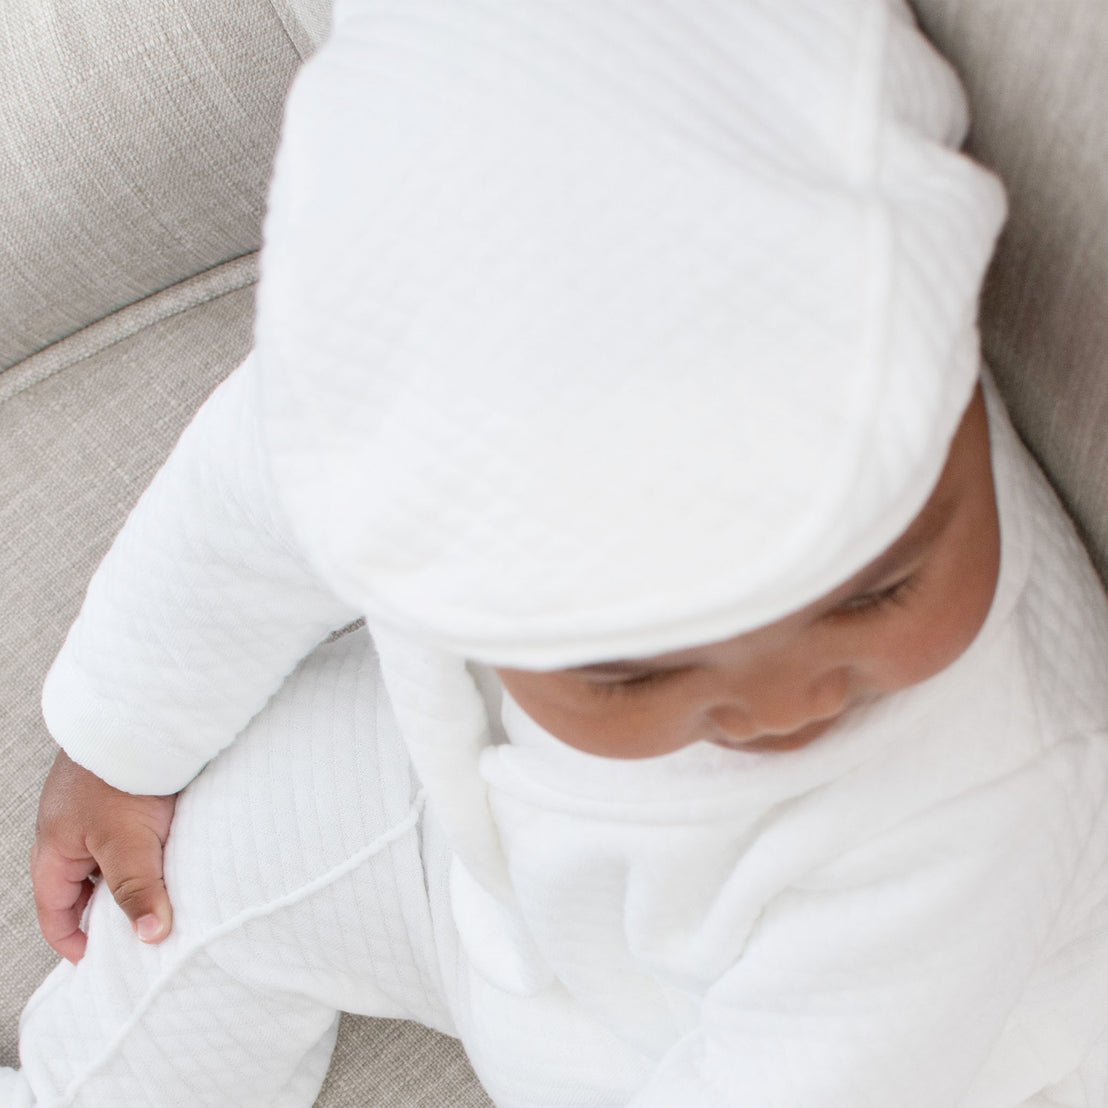 Baby boy wearing the Elijah Newsboy Cap. The photo shows the top of the hat and the white textured cotton that it is crafted from